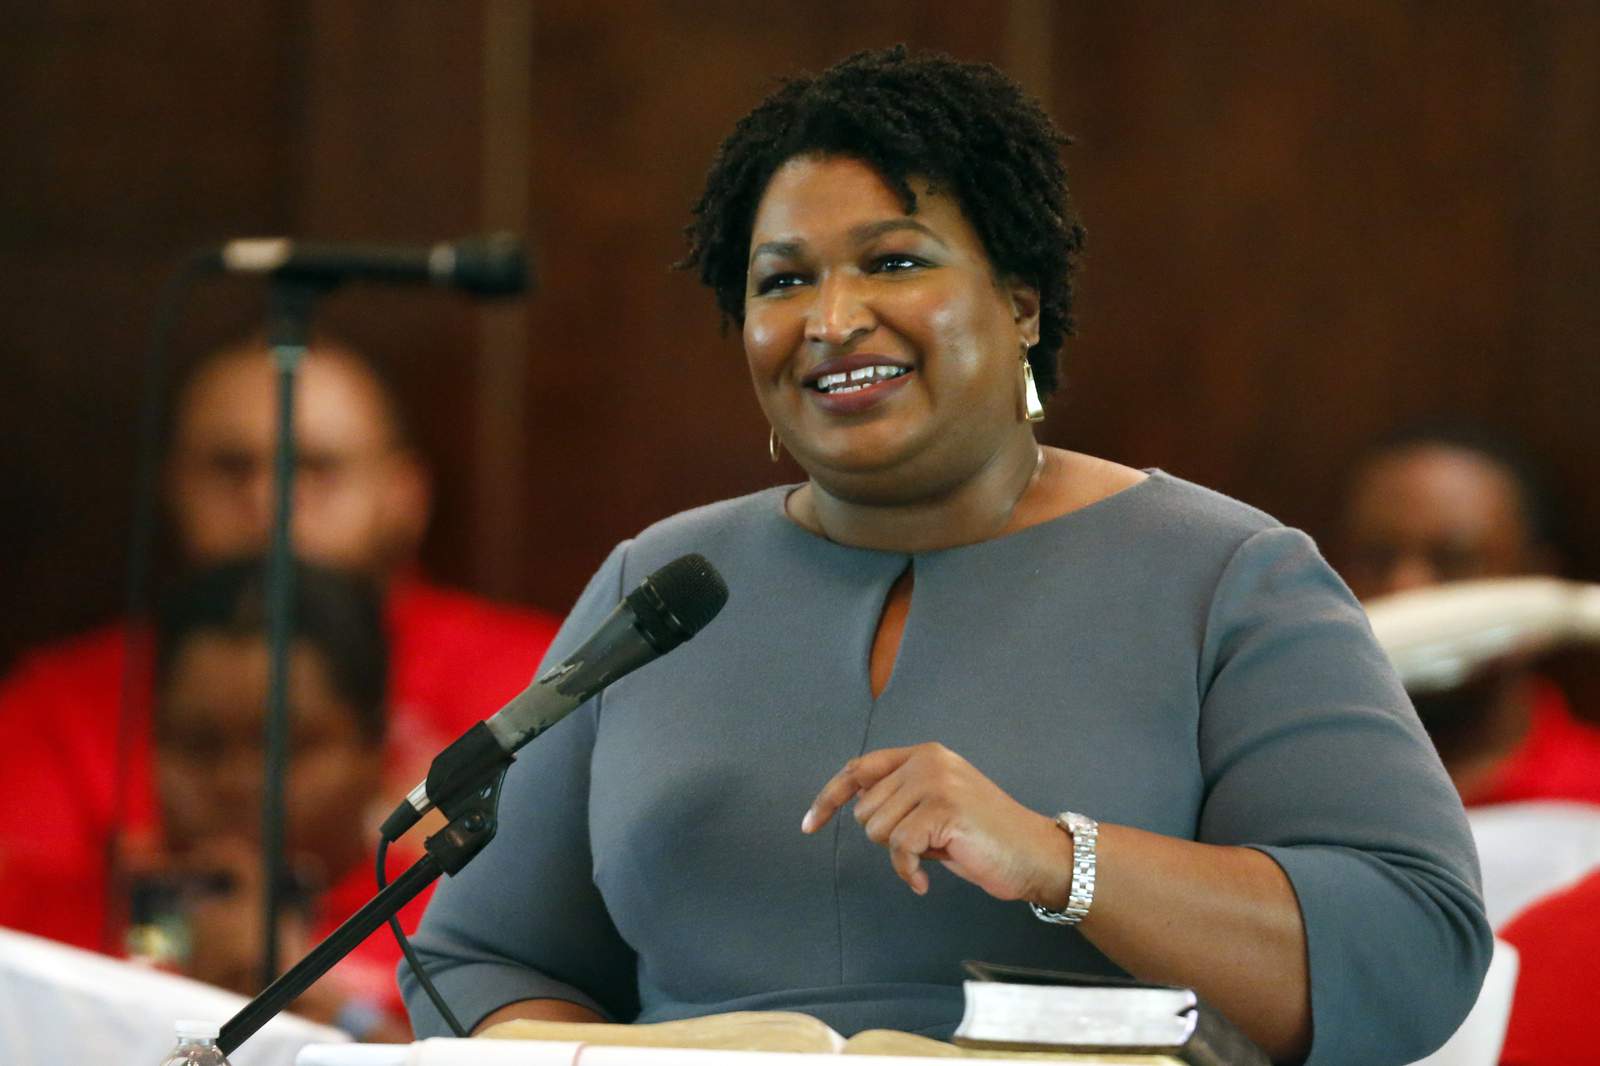 Stacey Abrams novel 'While Justice Sleeps' coming May 25